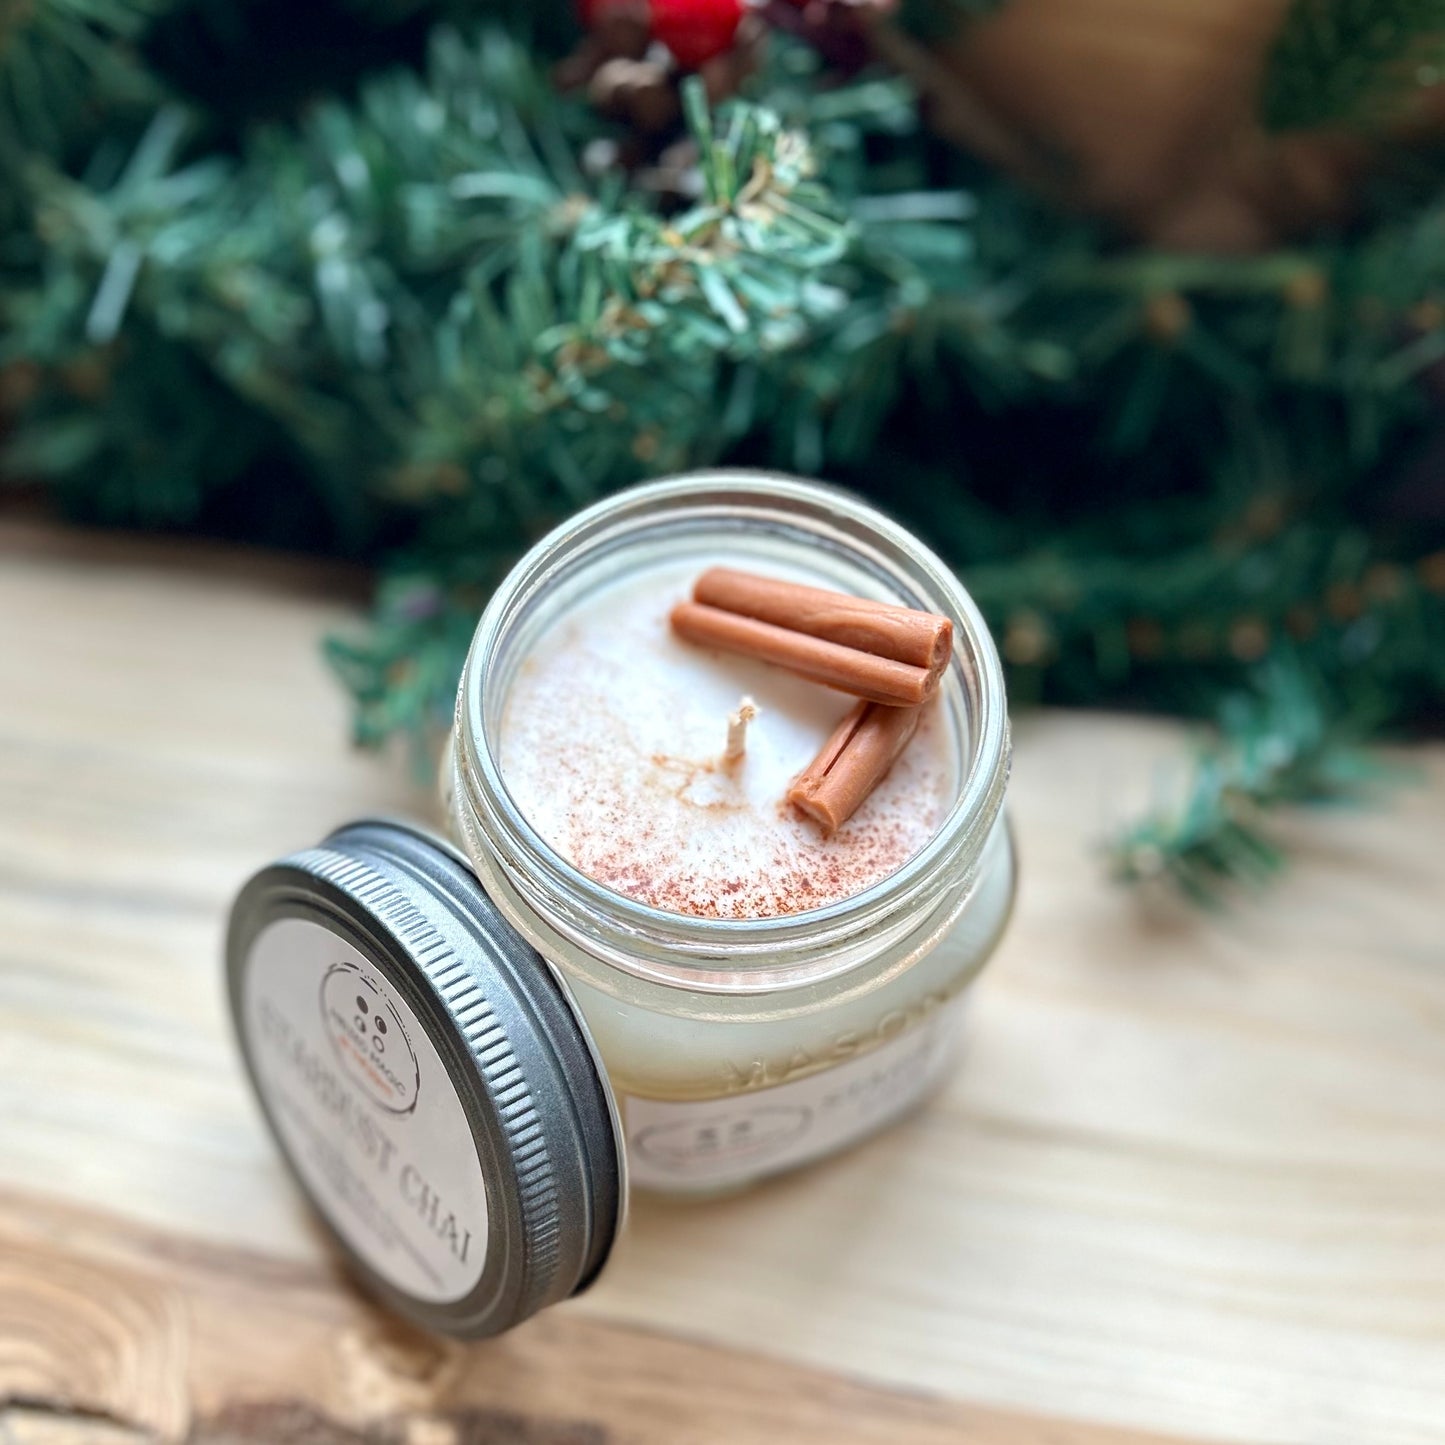 Stardust Chai Soy Candle | Melted Magic